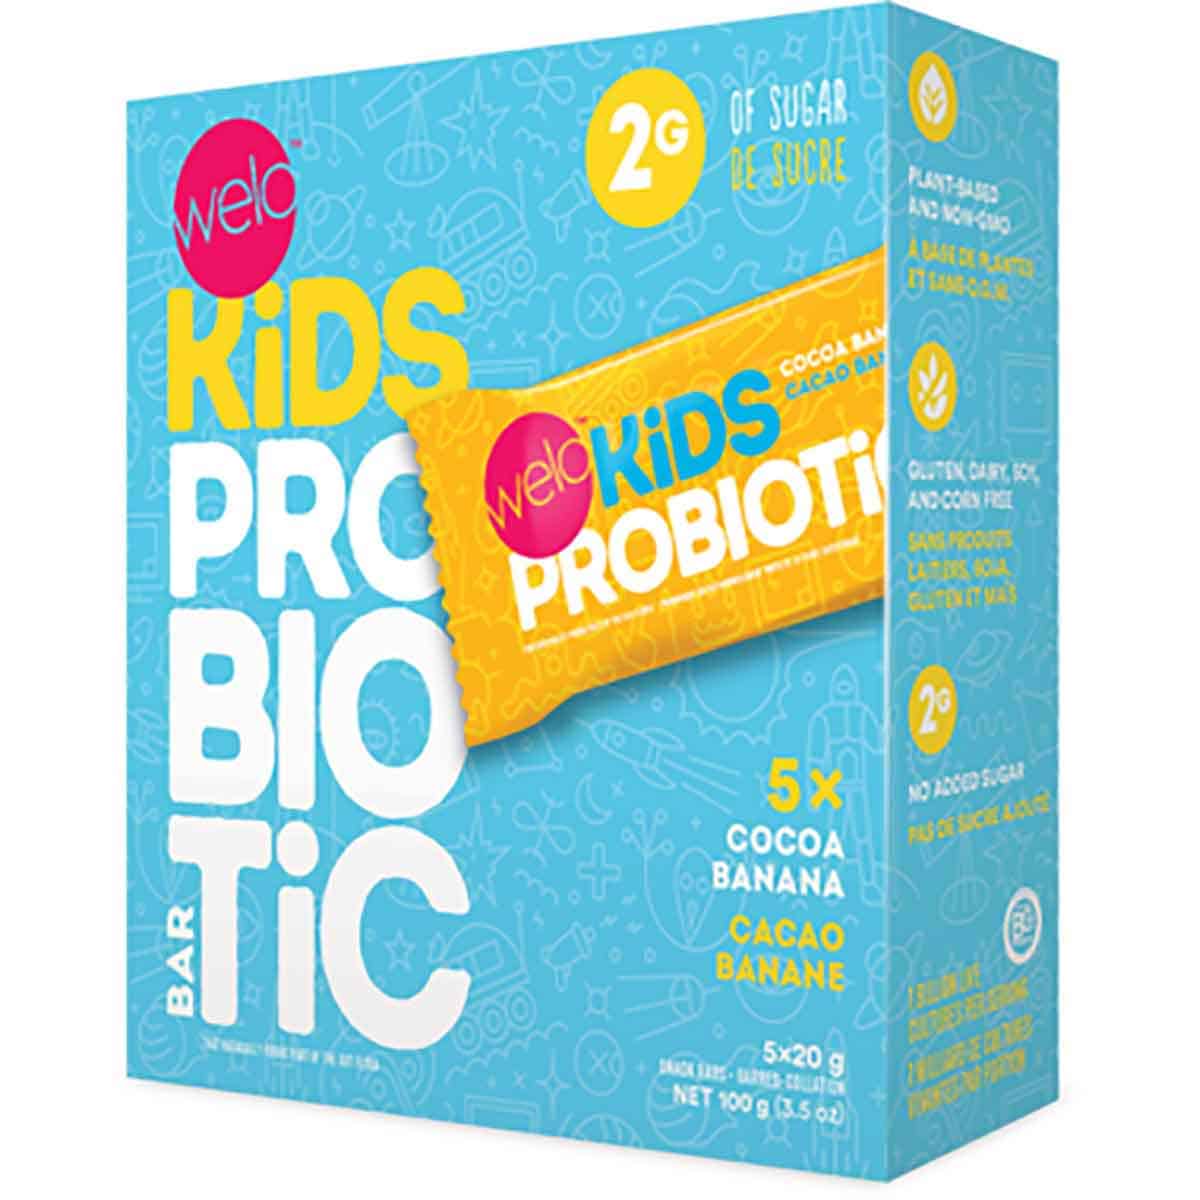 A blue box of kids probiotic bars by the brand "Welo".